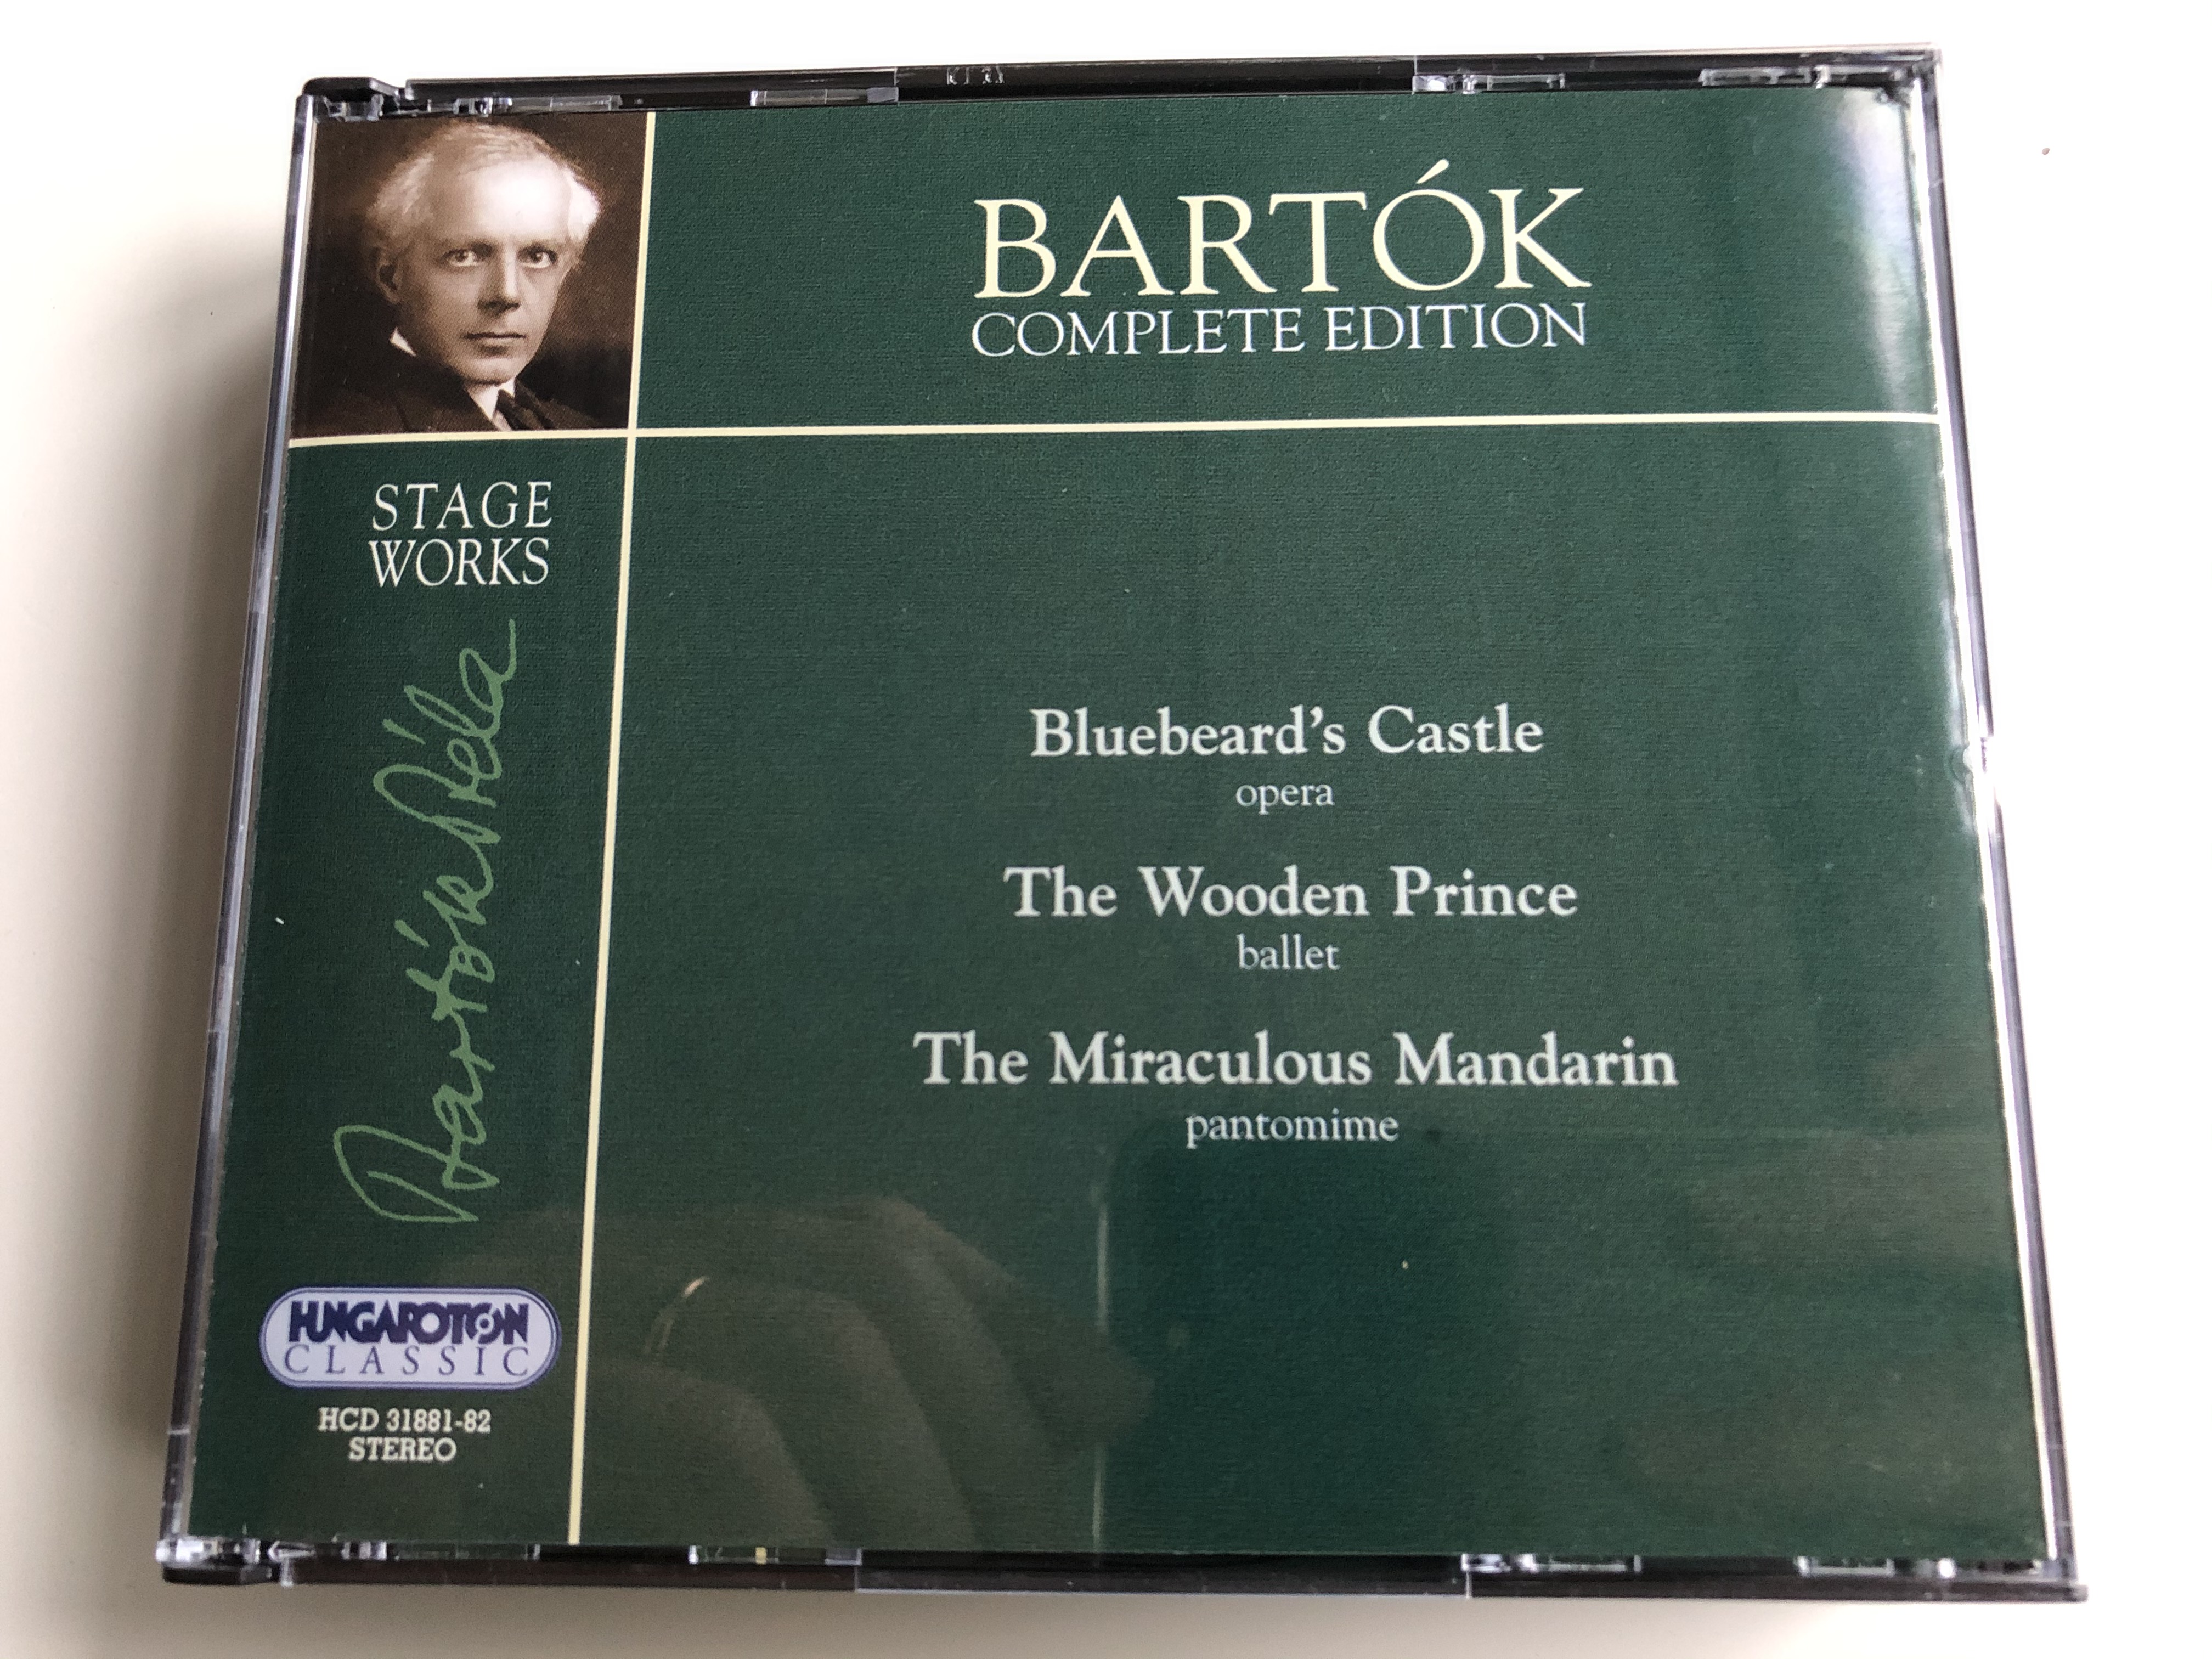 bartok-complete-edition-stage-works-bluebeard-s-castle-opera-the-wooden-prince-ballet-the-miraculous-mandarin-pantomime-hungaroton-classic-2x-audio-cd-2000-stereo-hcd-31881-82-1-.jpg